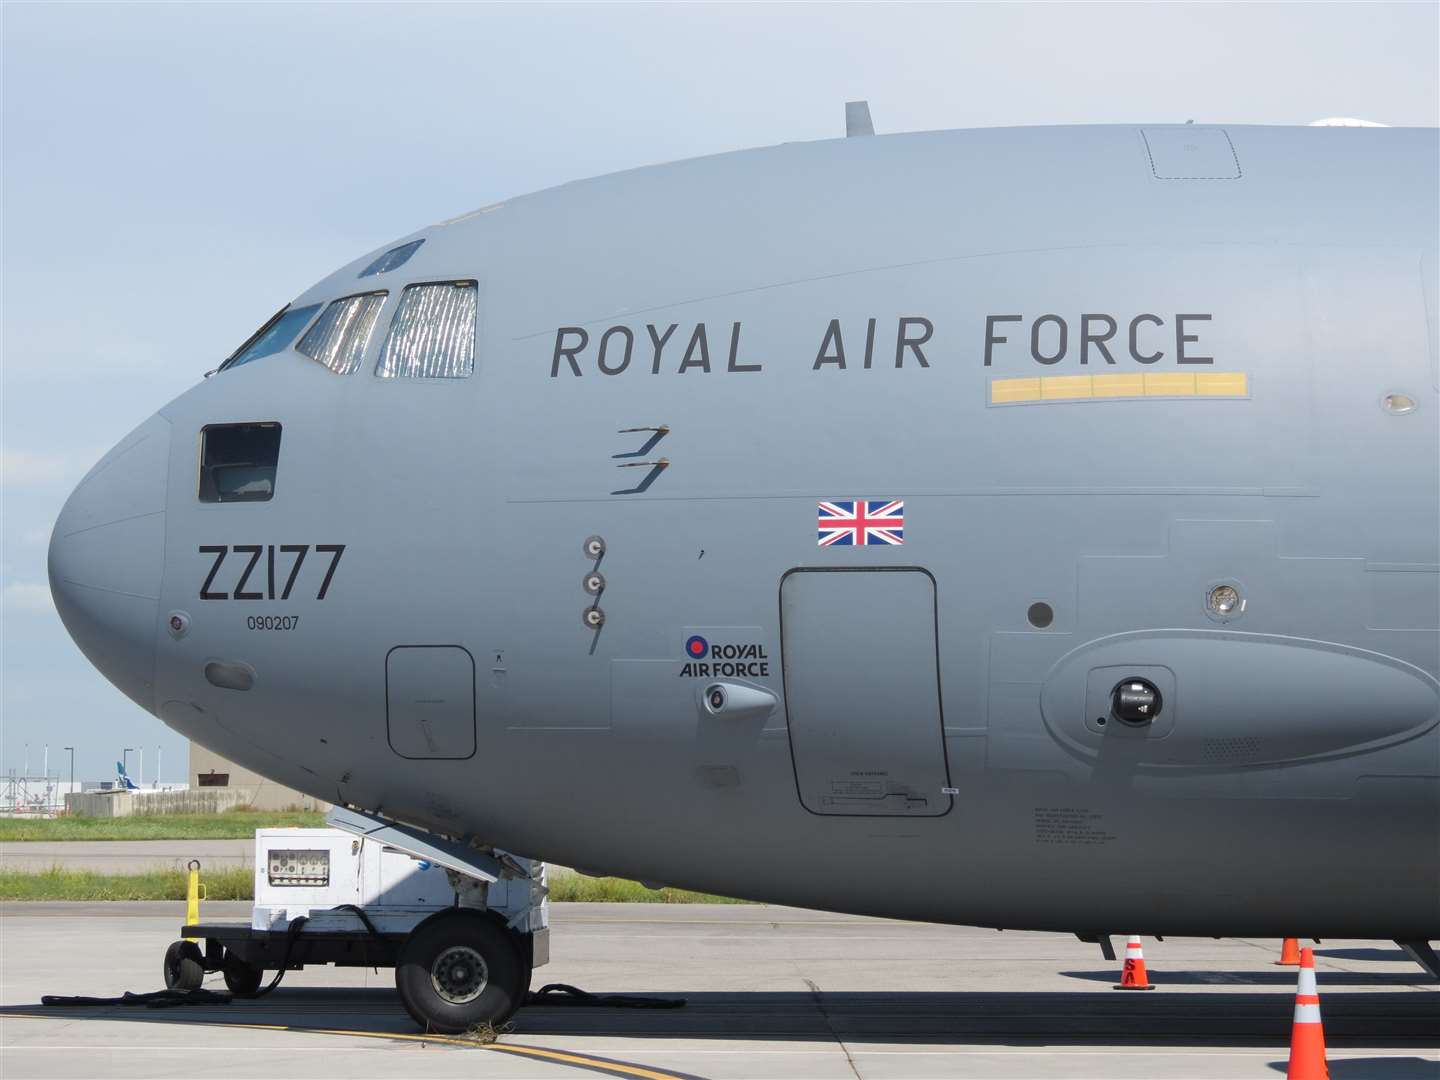 The RAF C-17 Globemaster has left Lossiemouth as part of the recovery efforts.